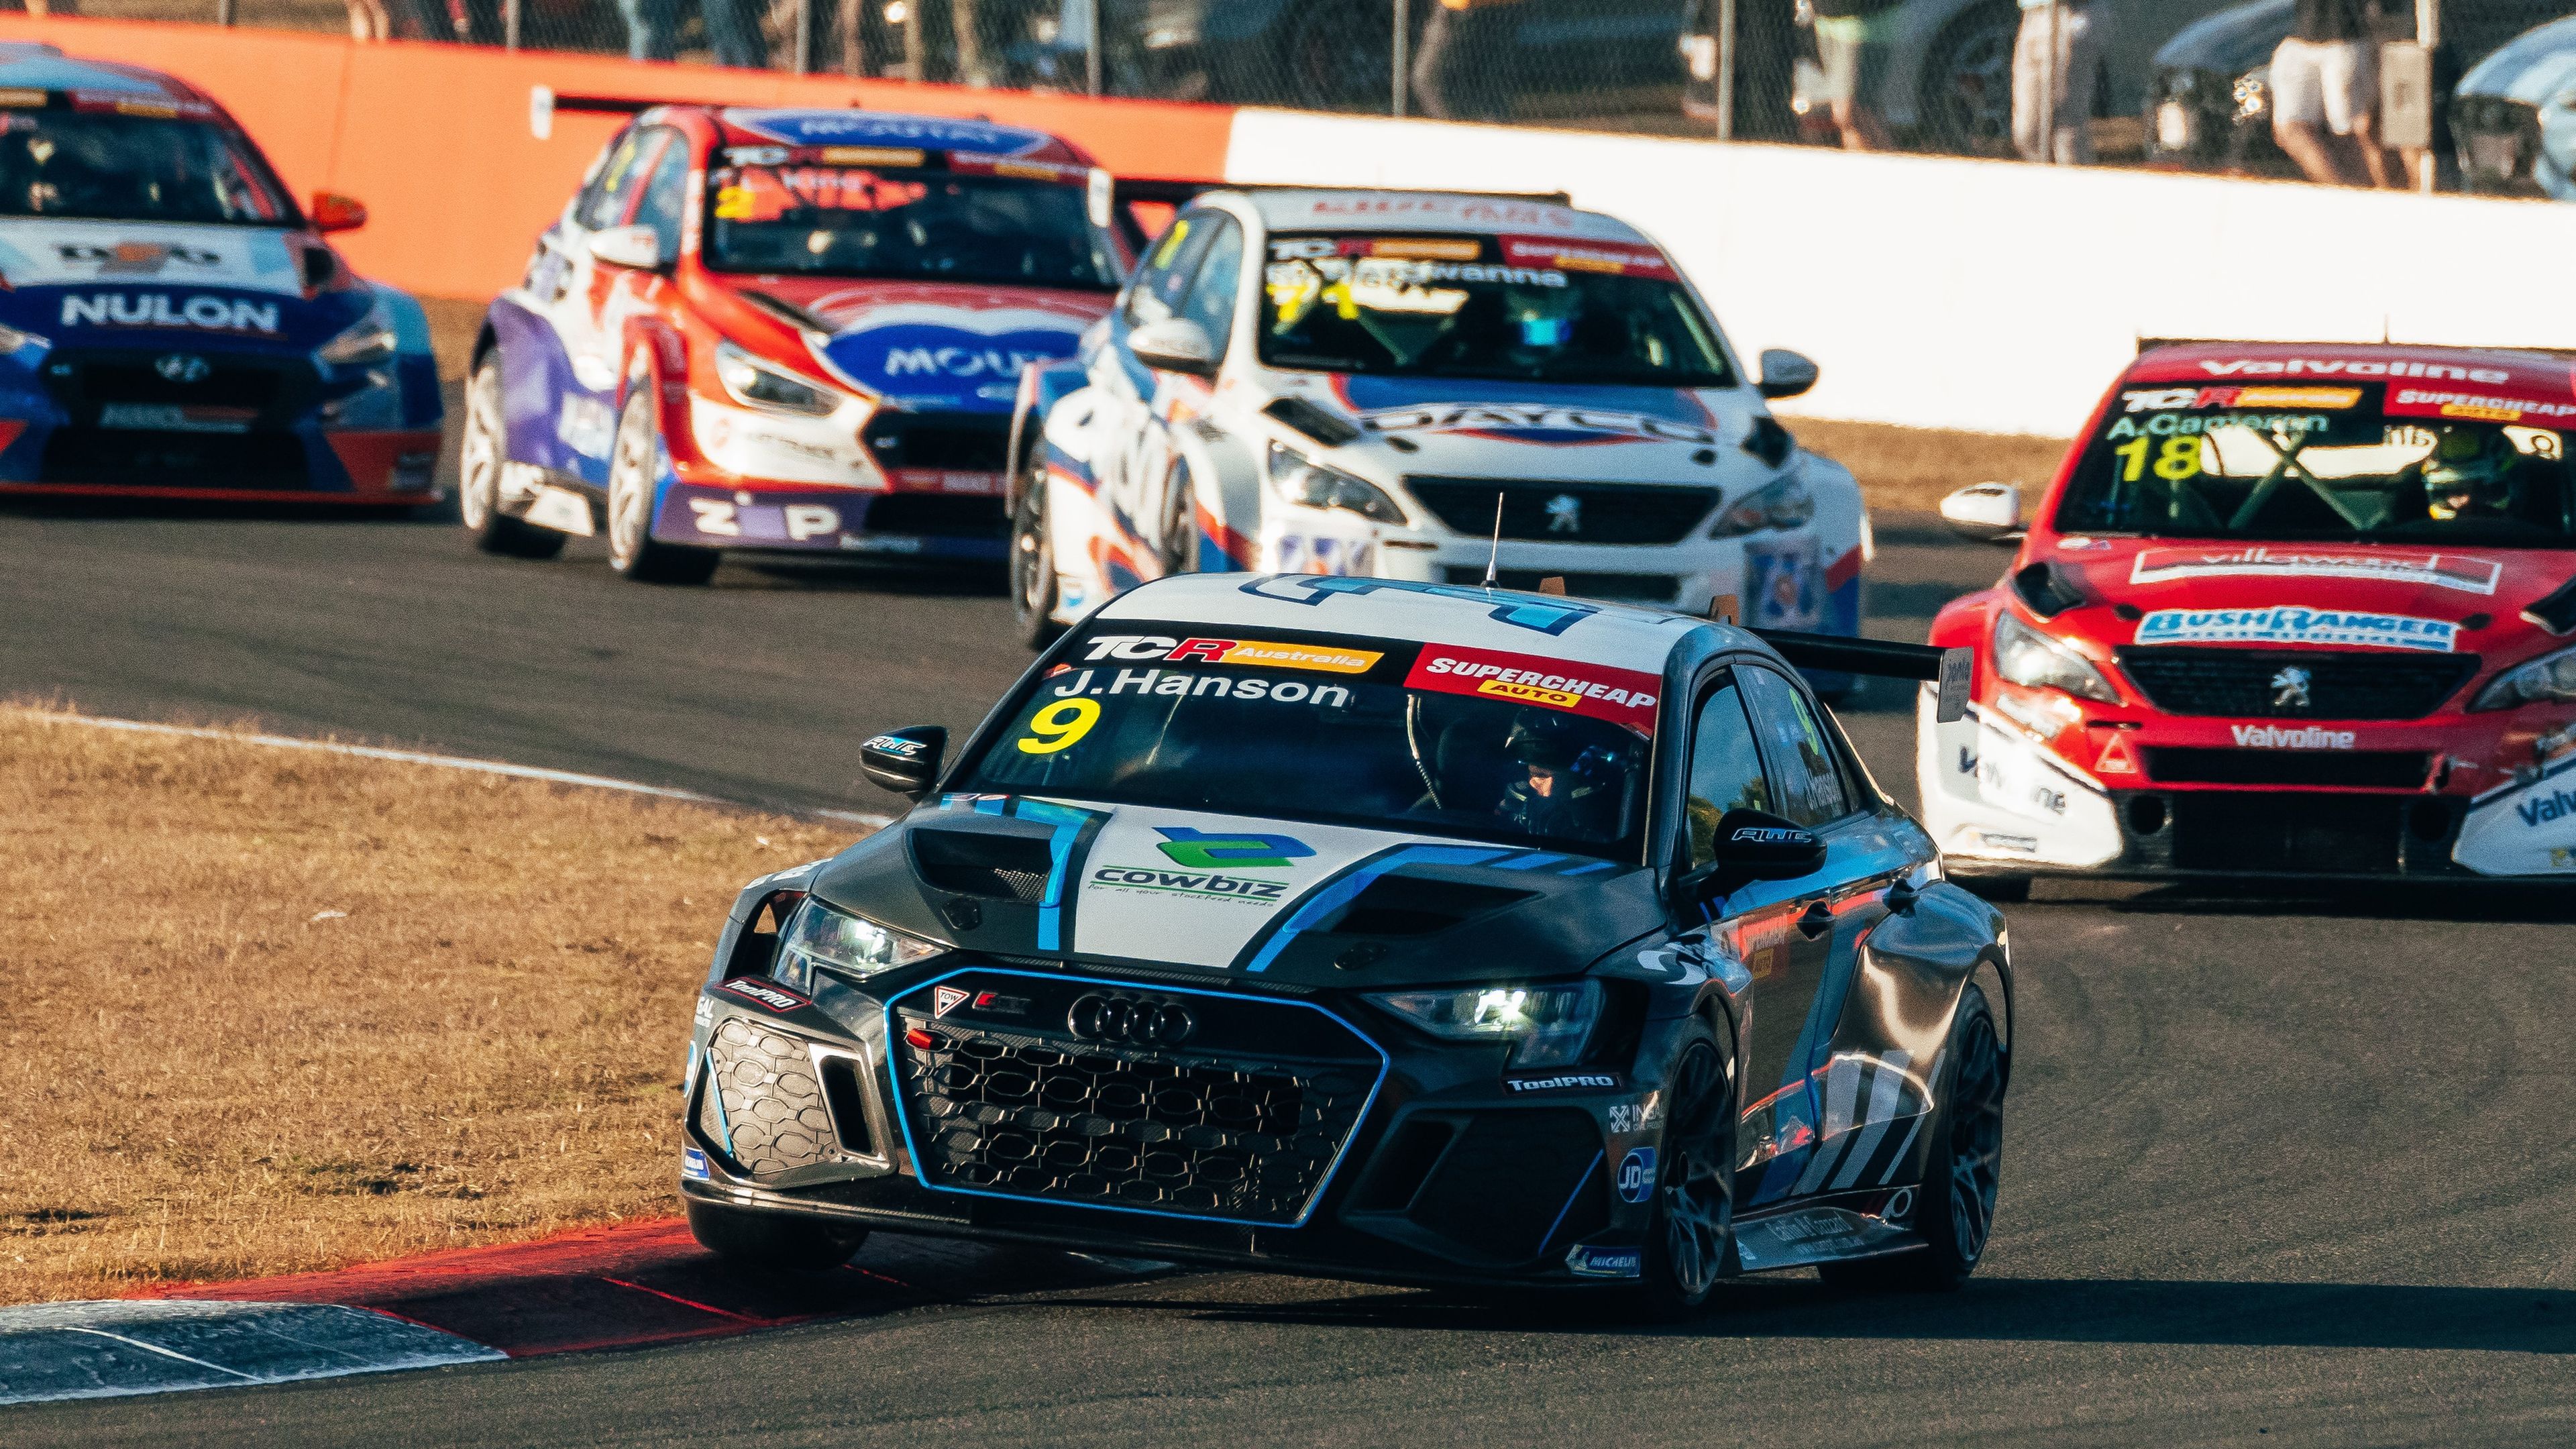 Cruel finish for Michael Caruso as teenager Jay Hanson snatches unlikely TCR win